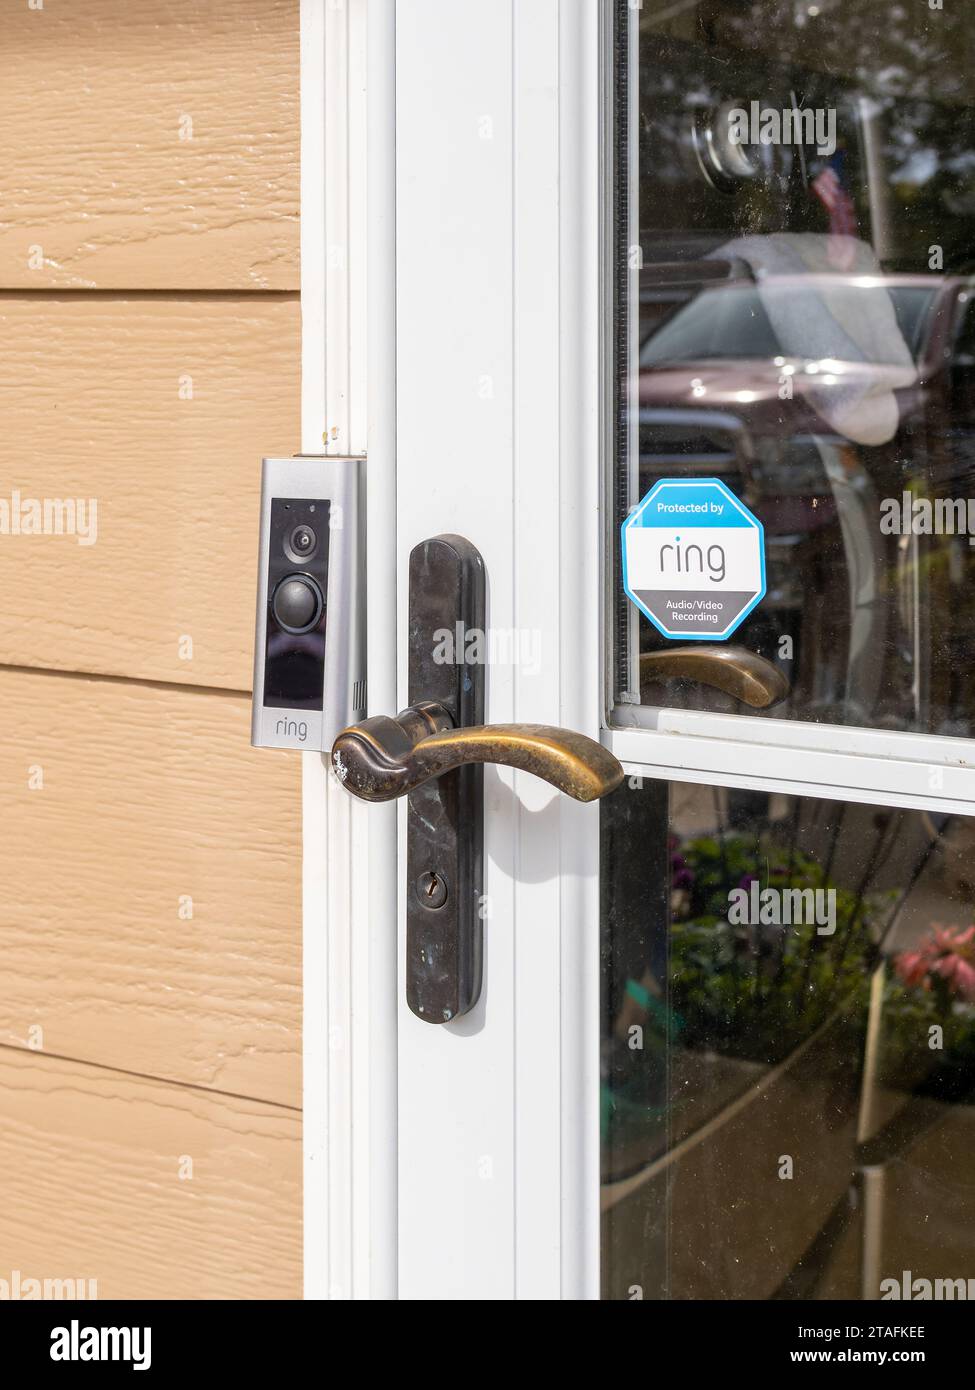 Ring doorbell surveillance camera, at the front door of a residence, house or home with a logo warning sticker on the door in Alabama, USA. Stock Photo